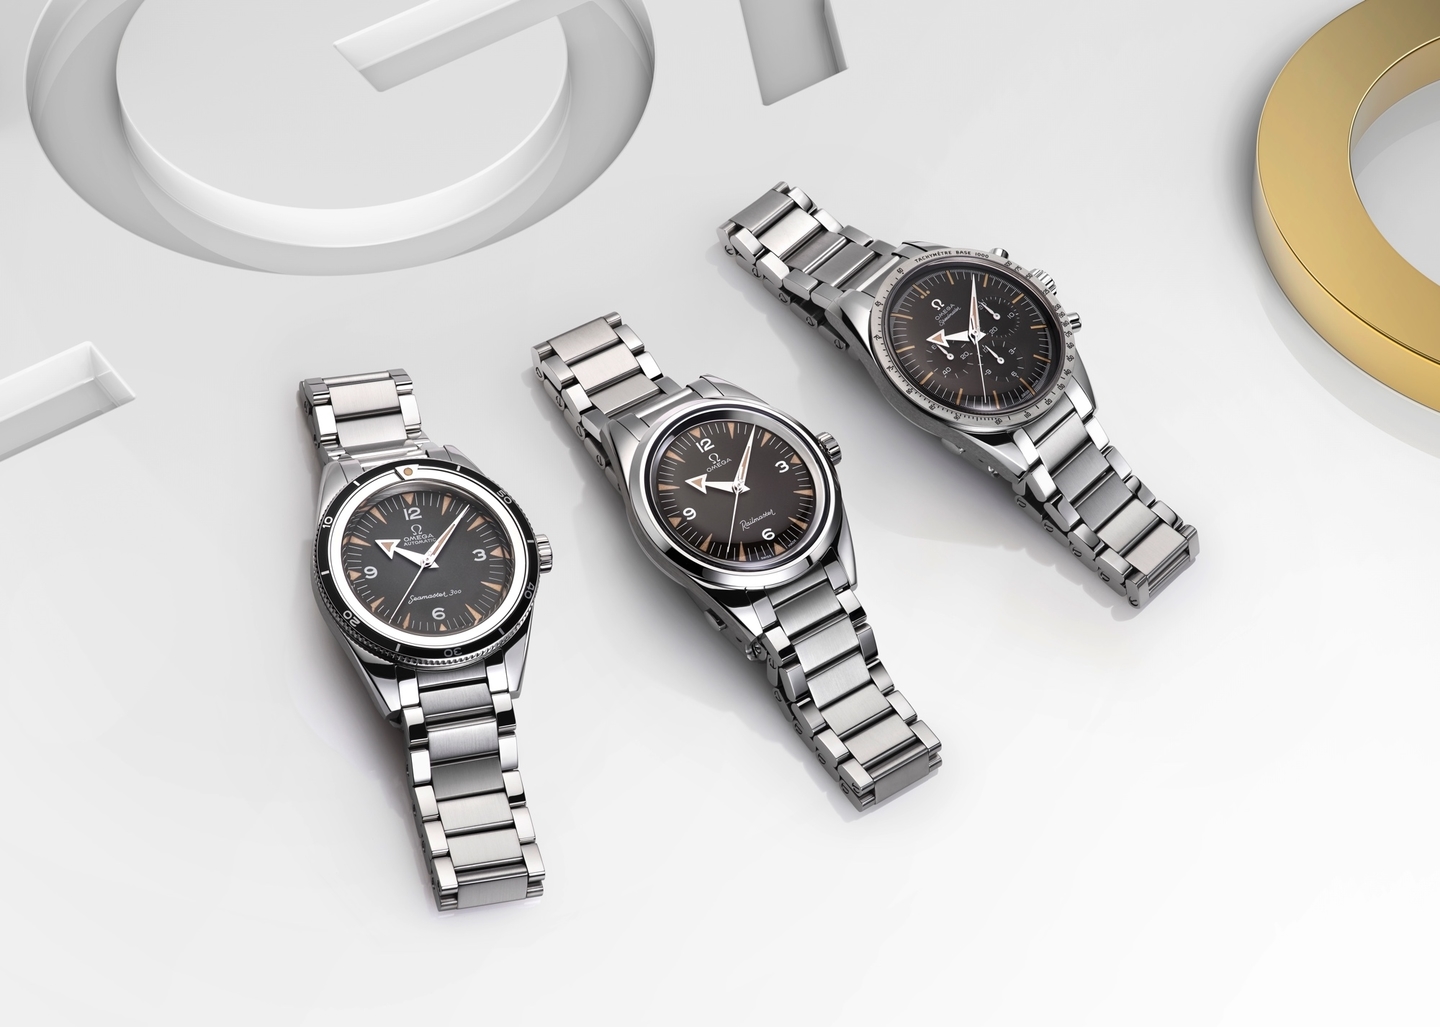 The Omega 1957 Trilogy Limited Editions